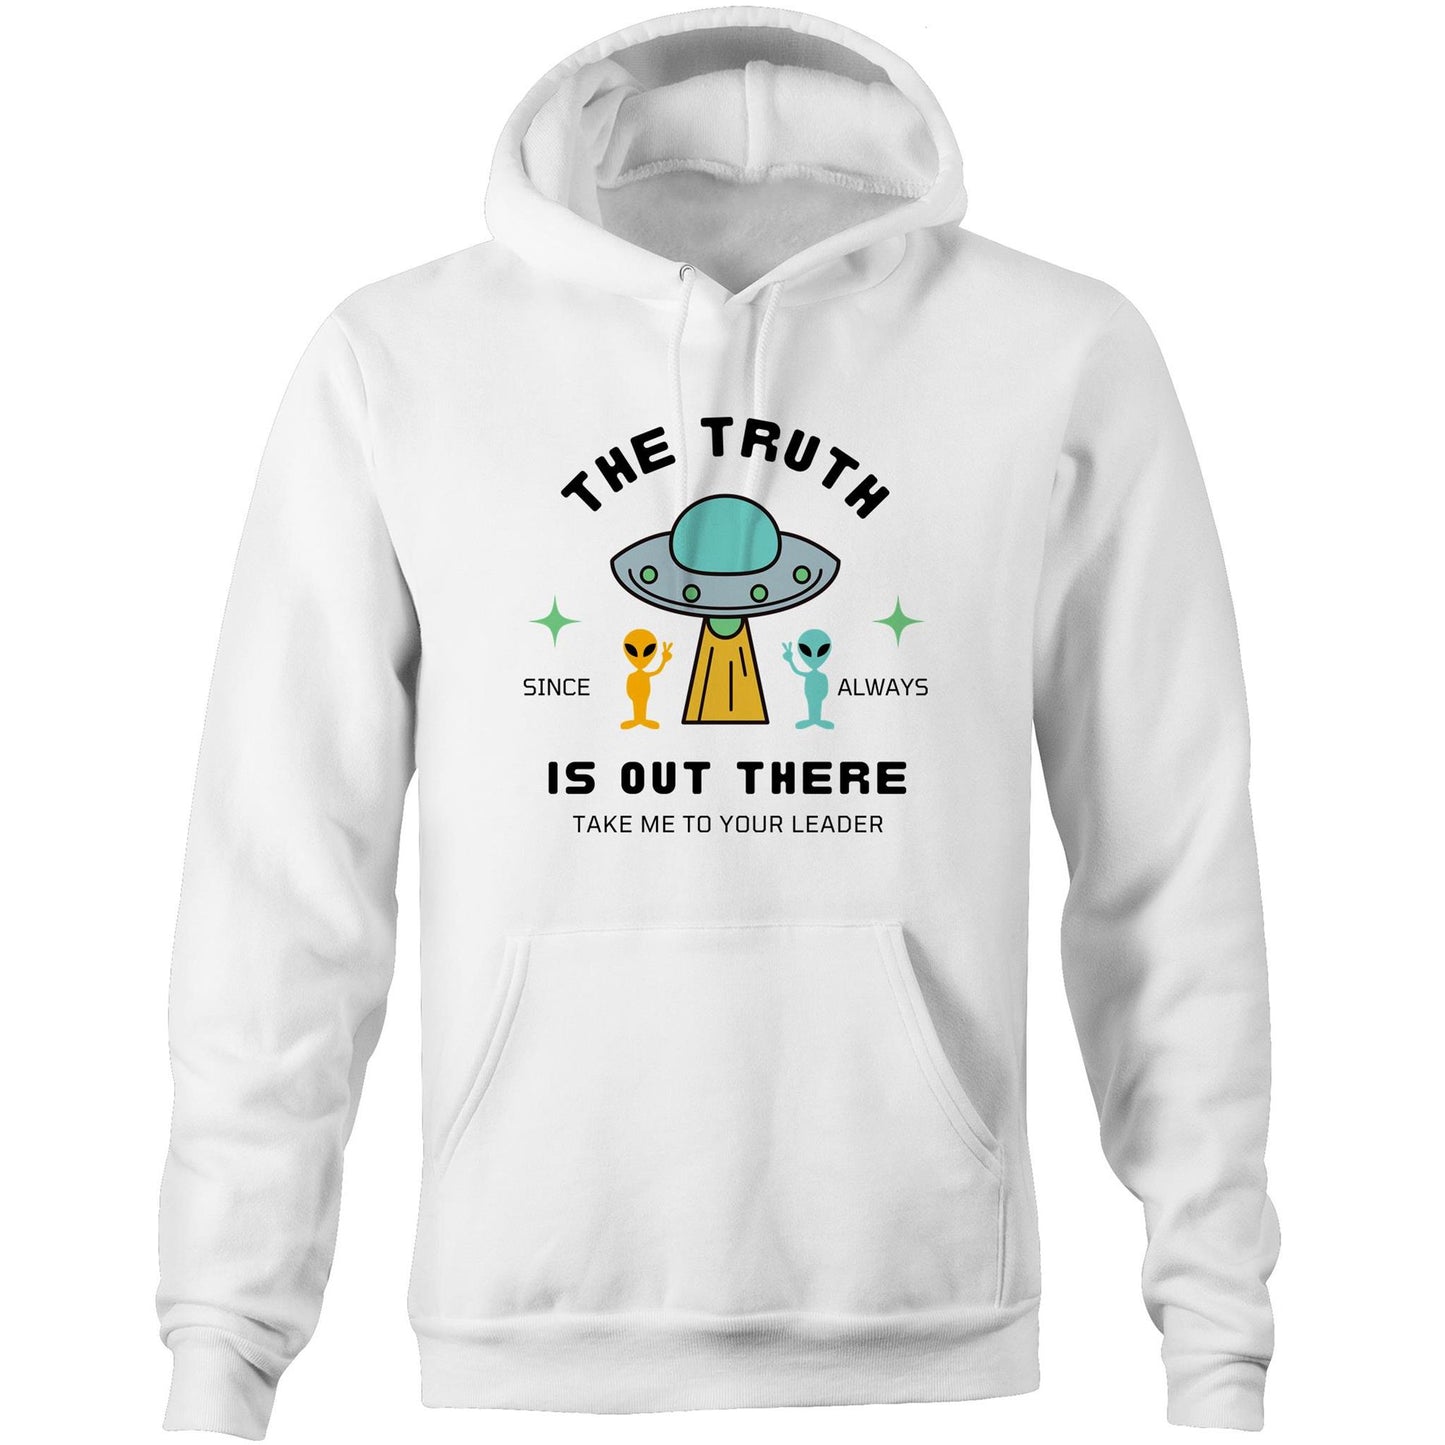 The Truth Is Out There - Pocket Hoodie Sweatshirt White Hoodie Sci Fi